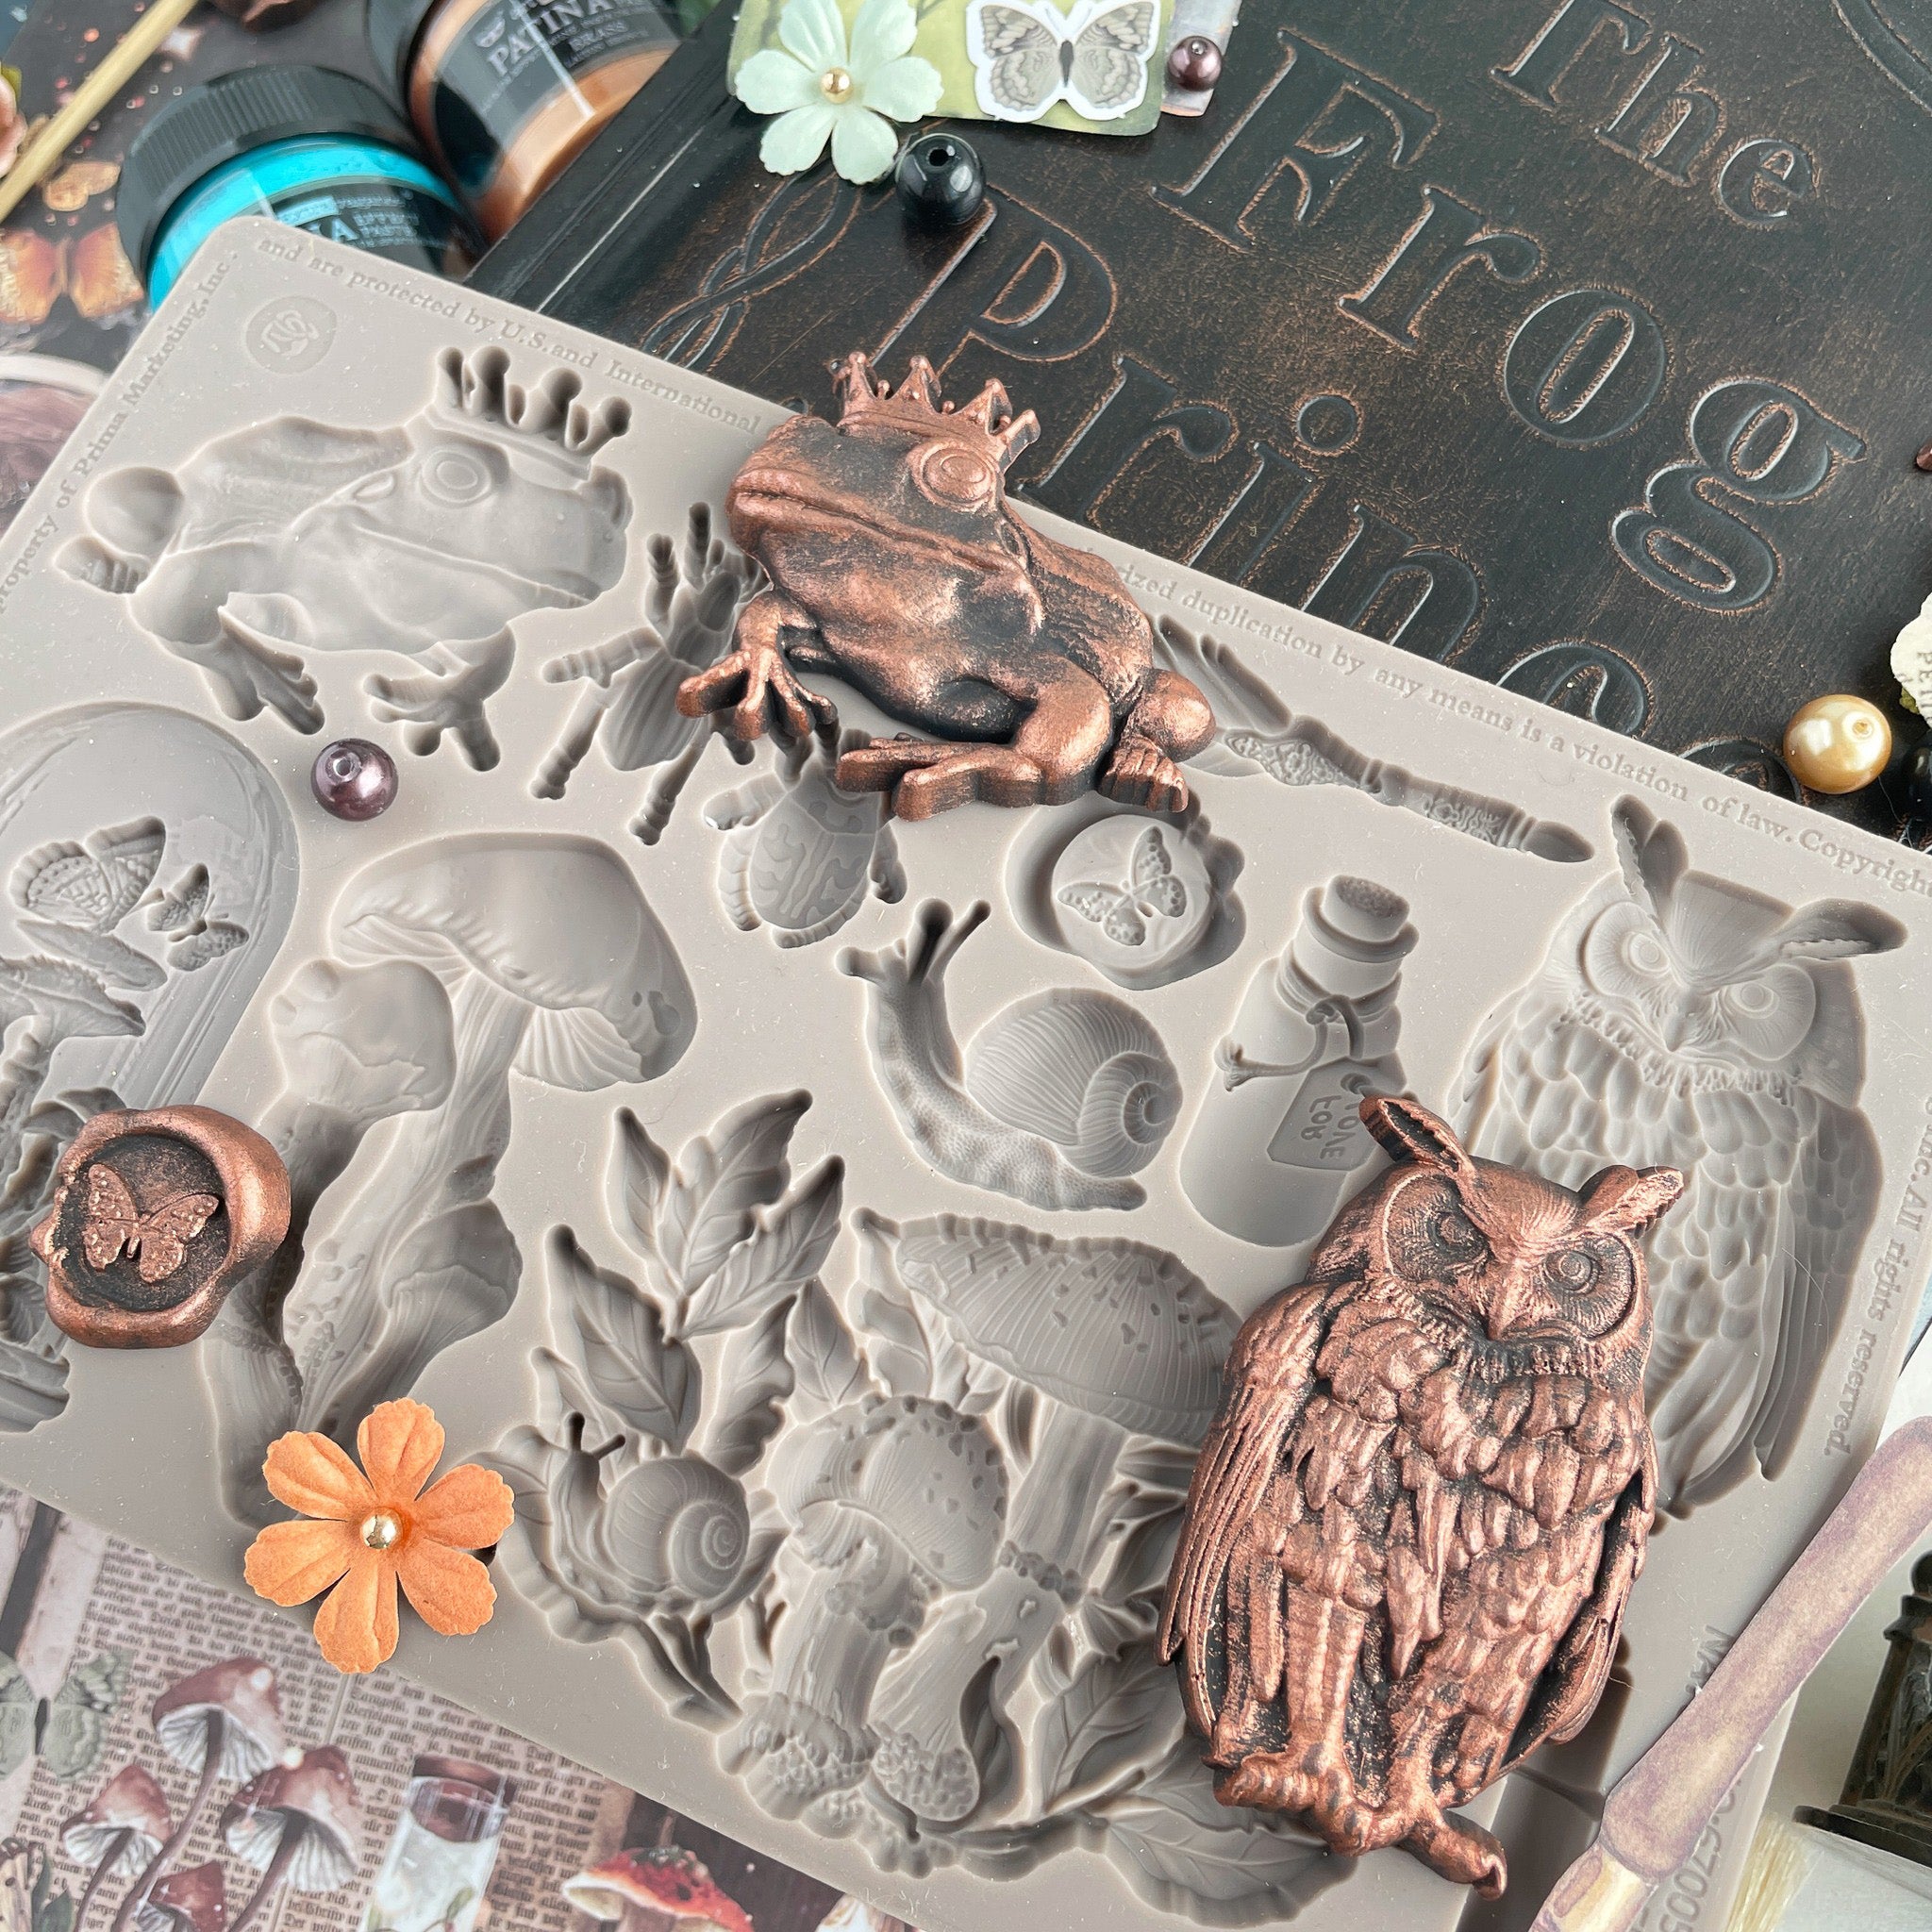 Bronze colored castings of a frog with a crown and an owl from Prima Marketing's Nature Academia silicone mold are on a project desk.